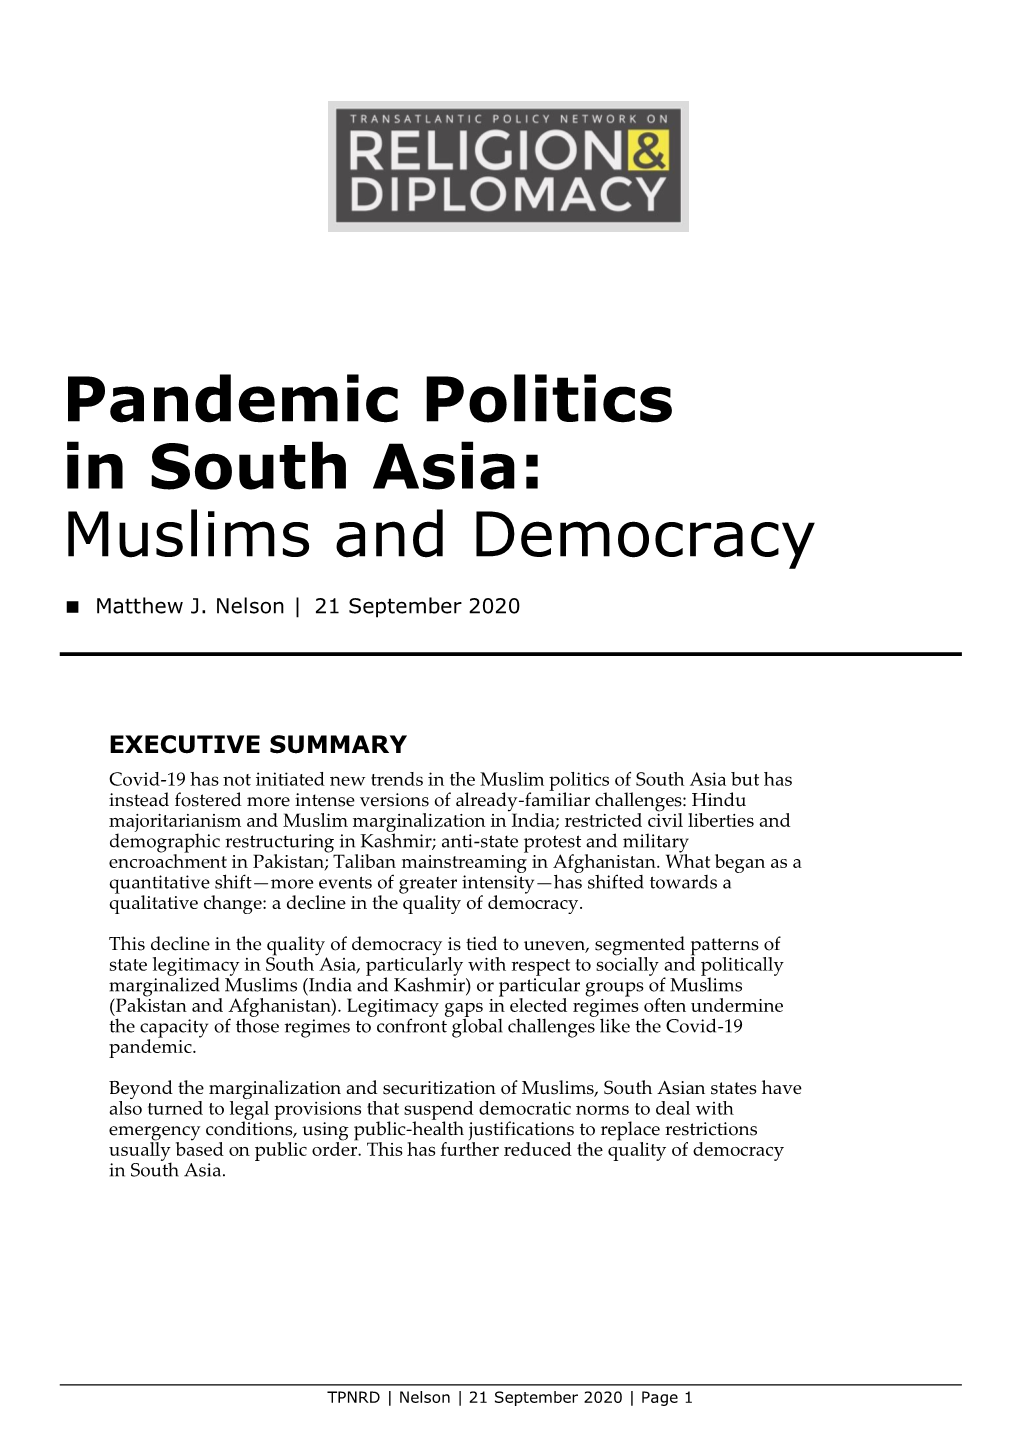 Pandemic Politics in South Asia: Muslims and Democracy